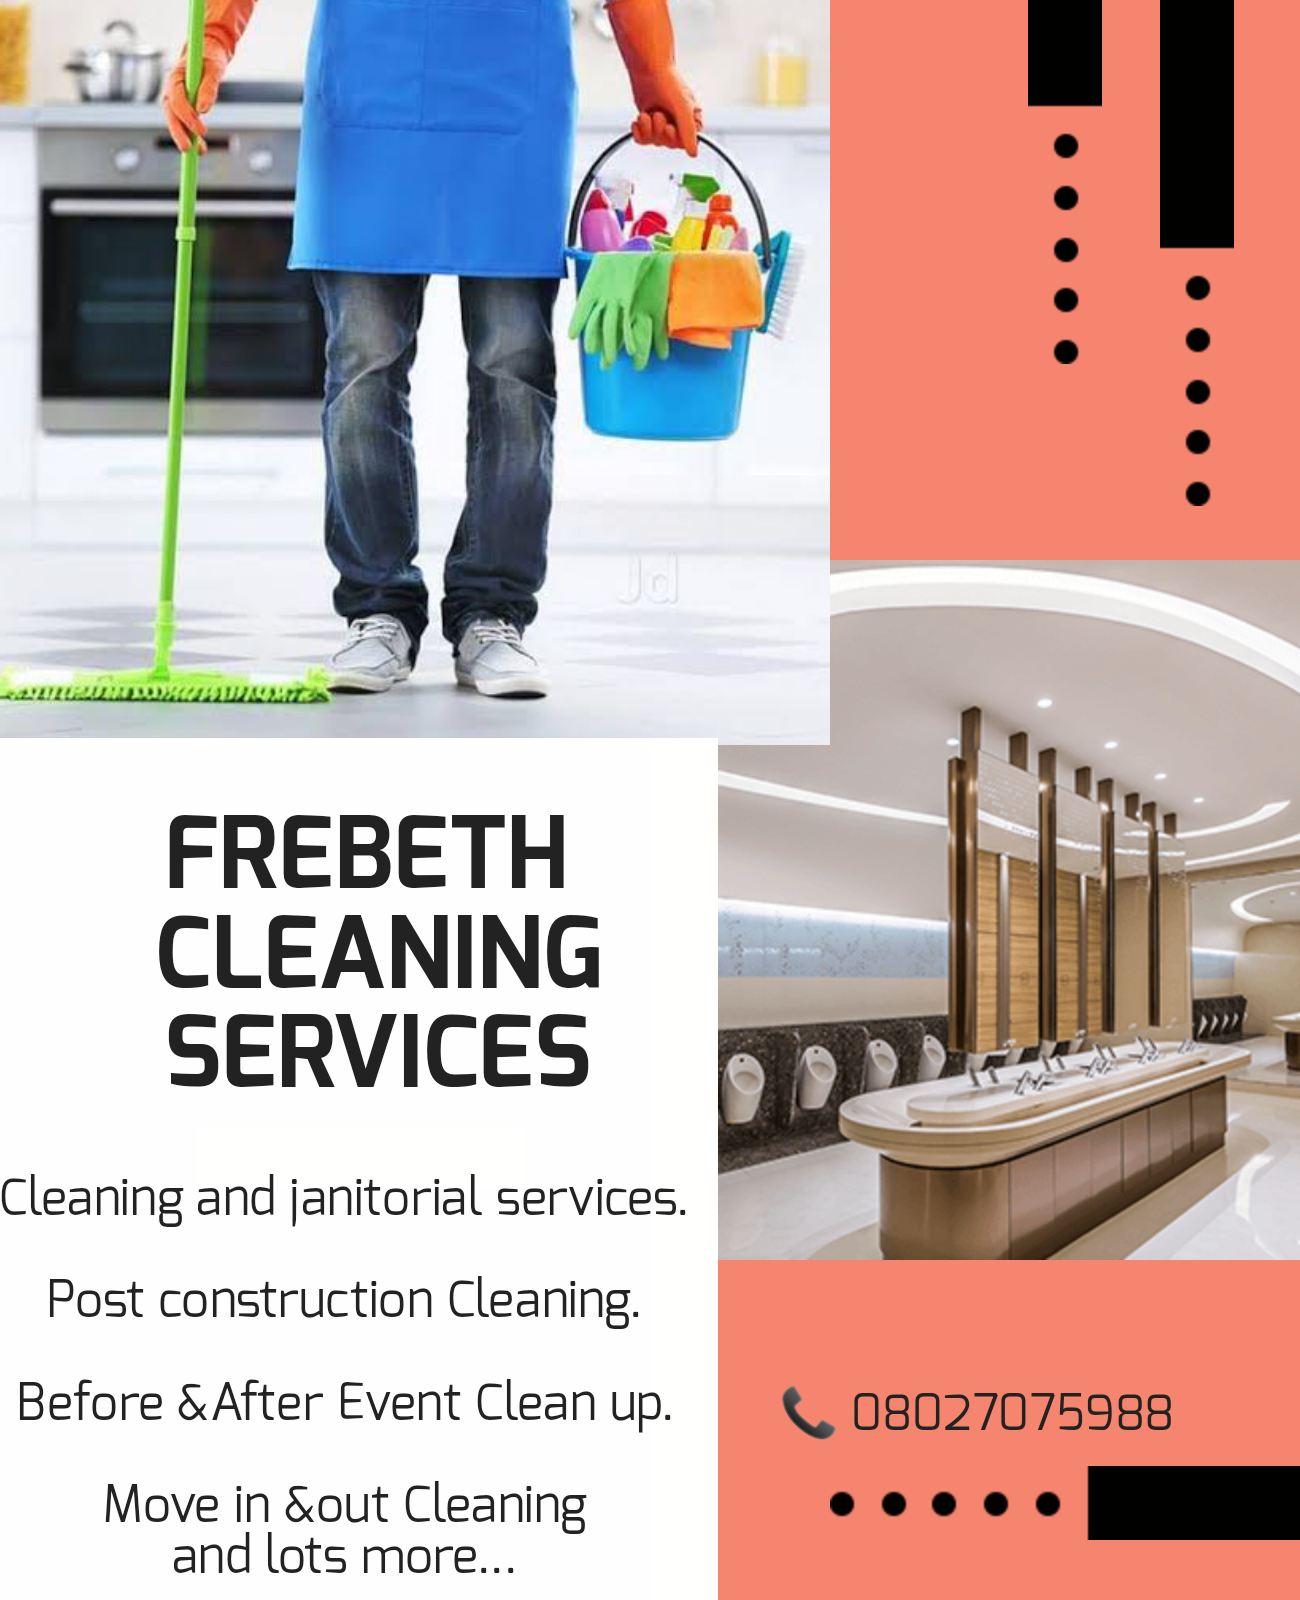 Frebeth cleaning Services provider